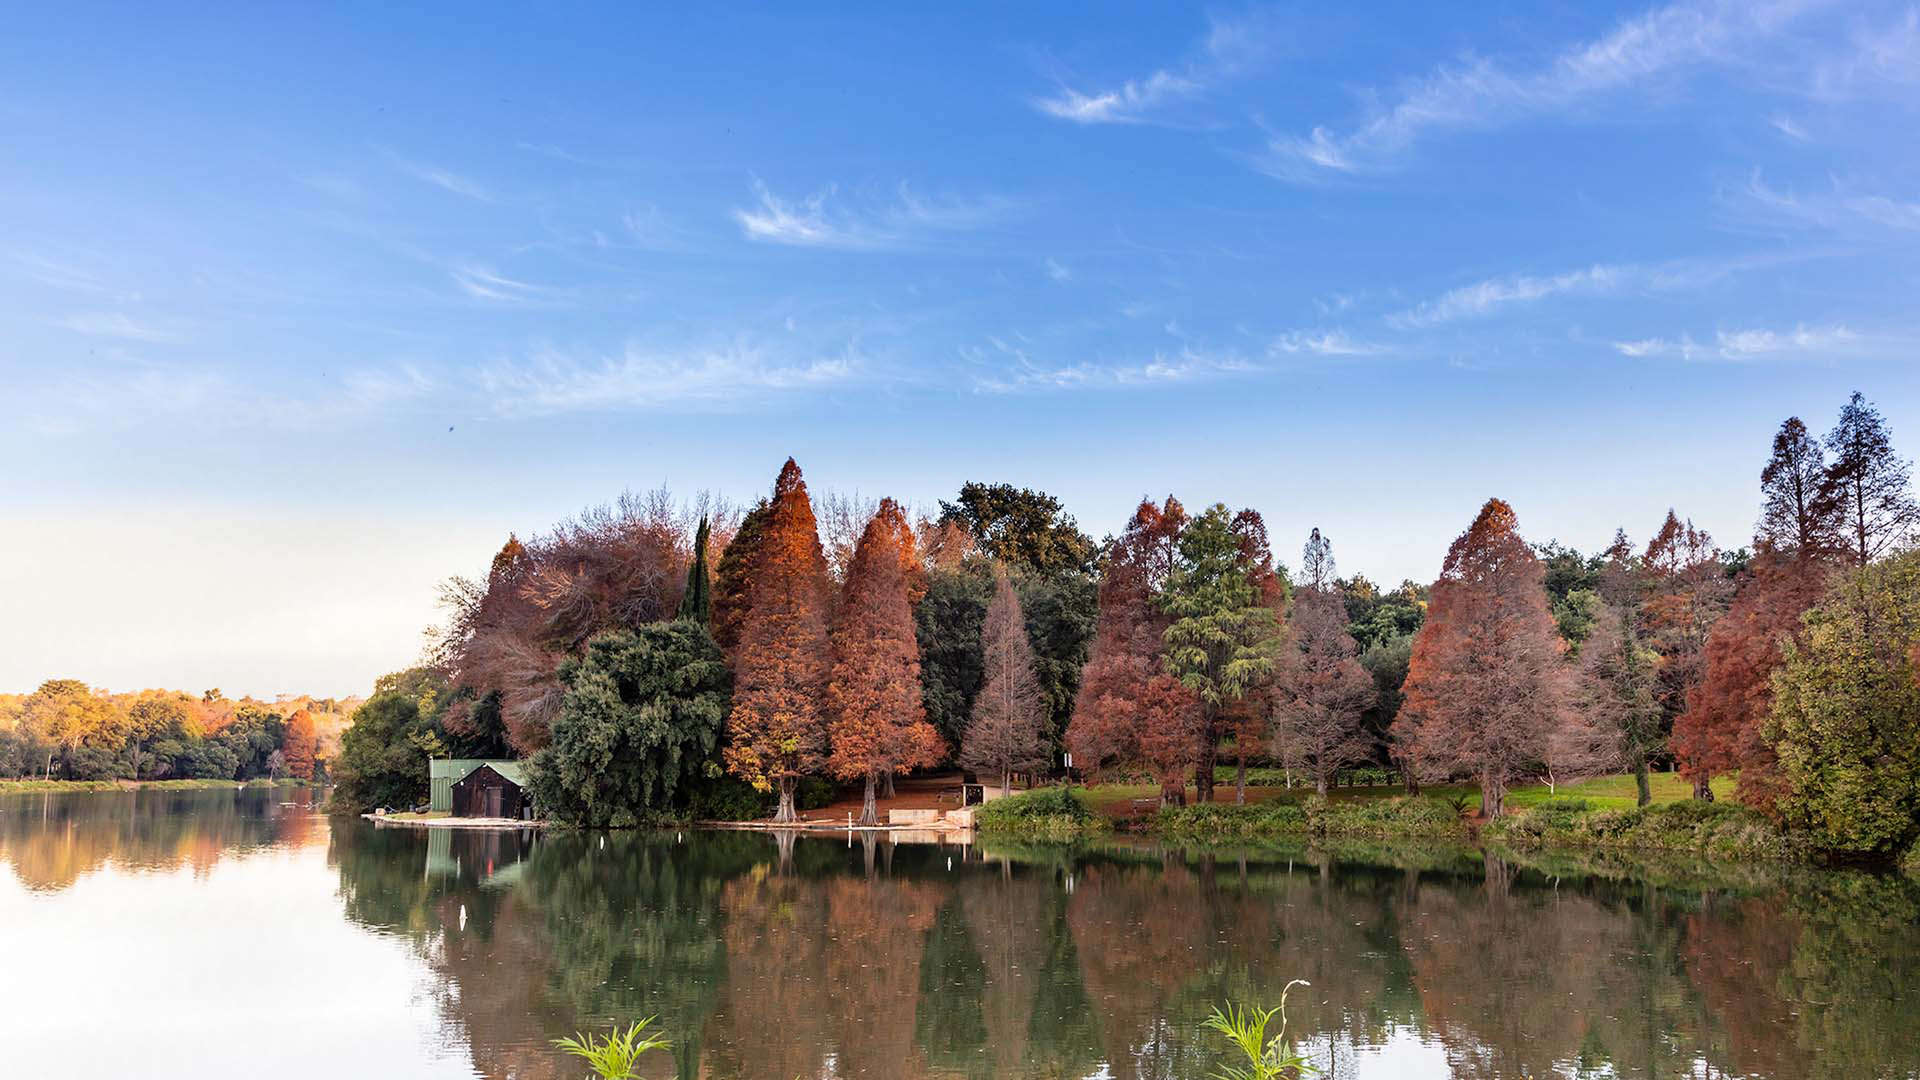 Spend time outdoors in the Johannesburg Botanical Garden